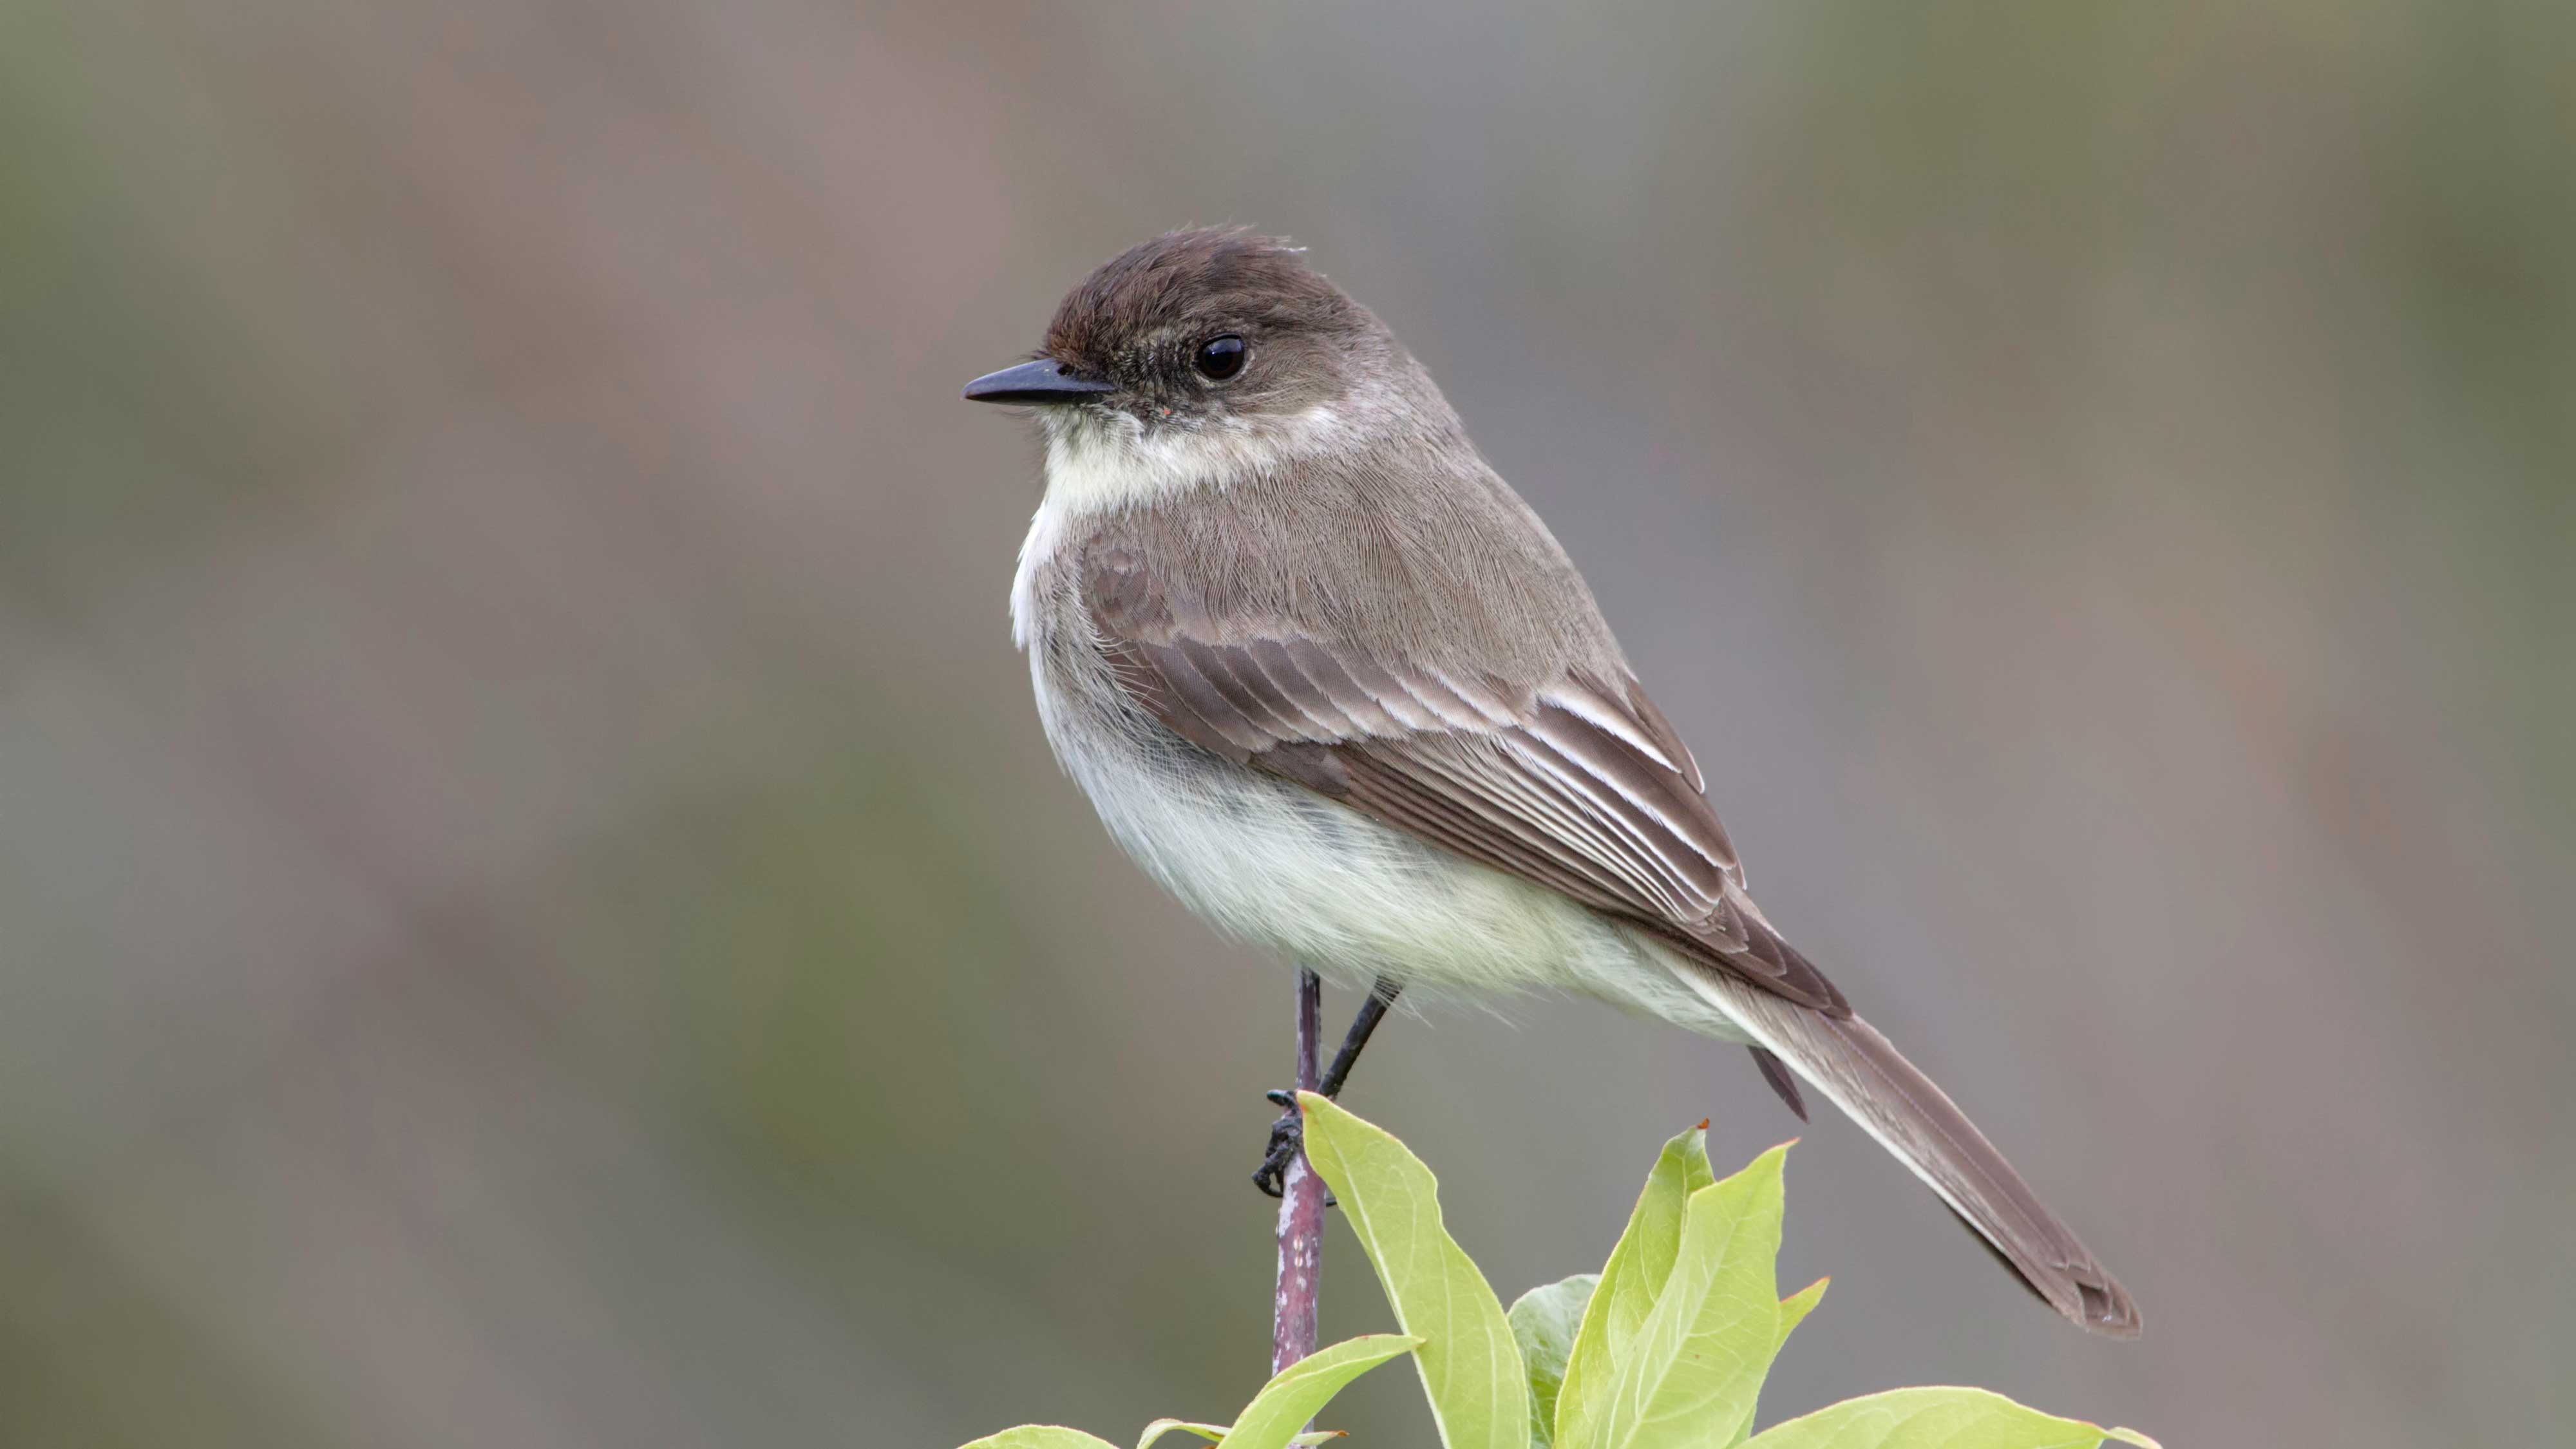 An eastern phoebe on a branch.